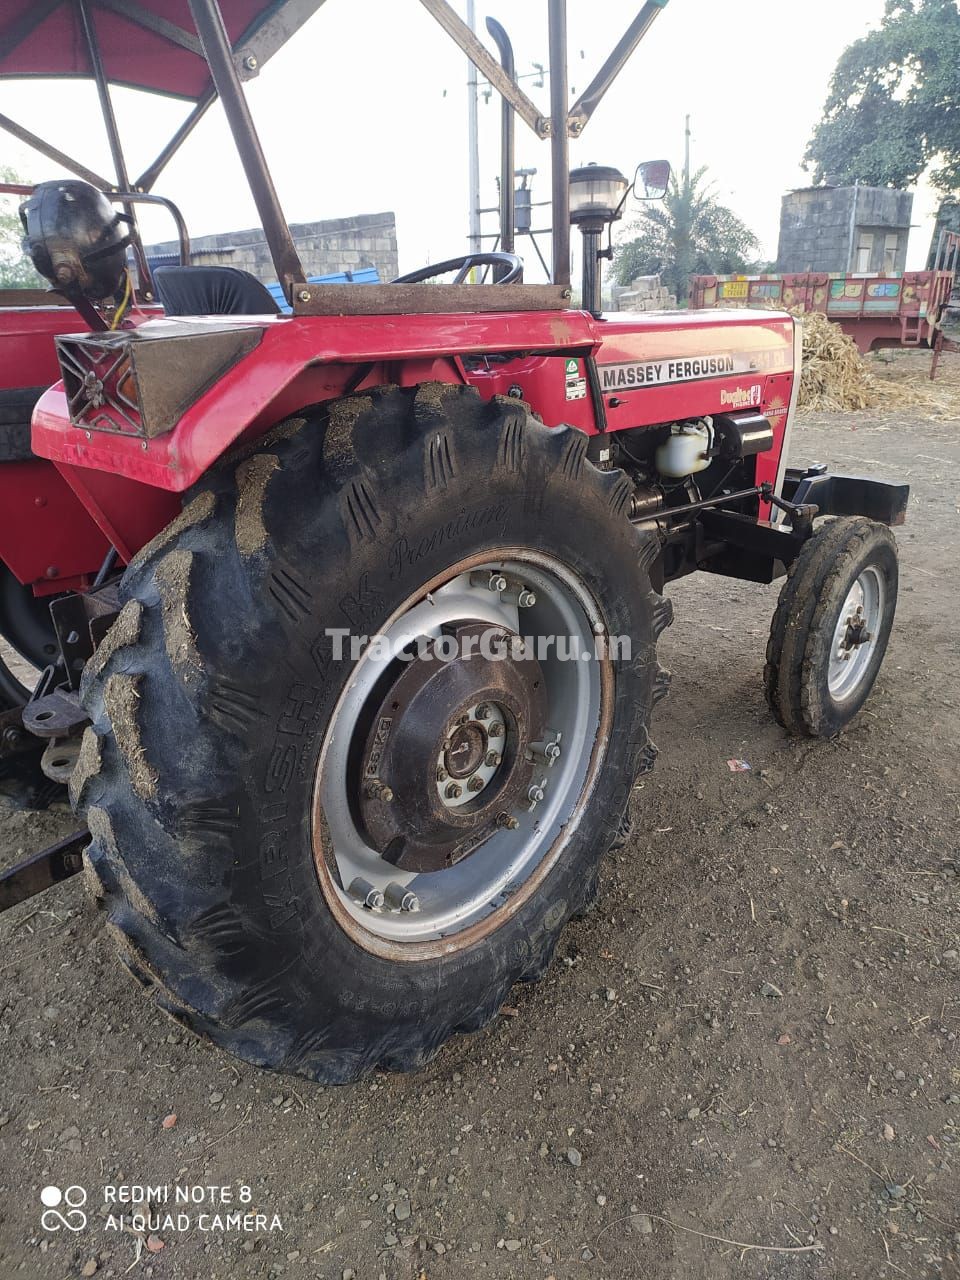 Get Second Hand Massey Ferguson 241 DI Tractor in Good Condition - 6200